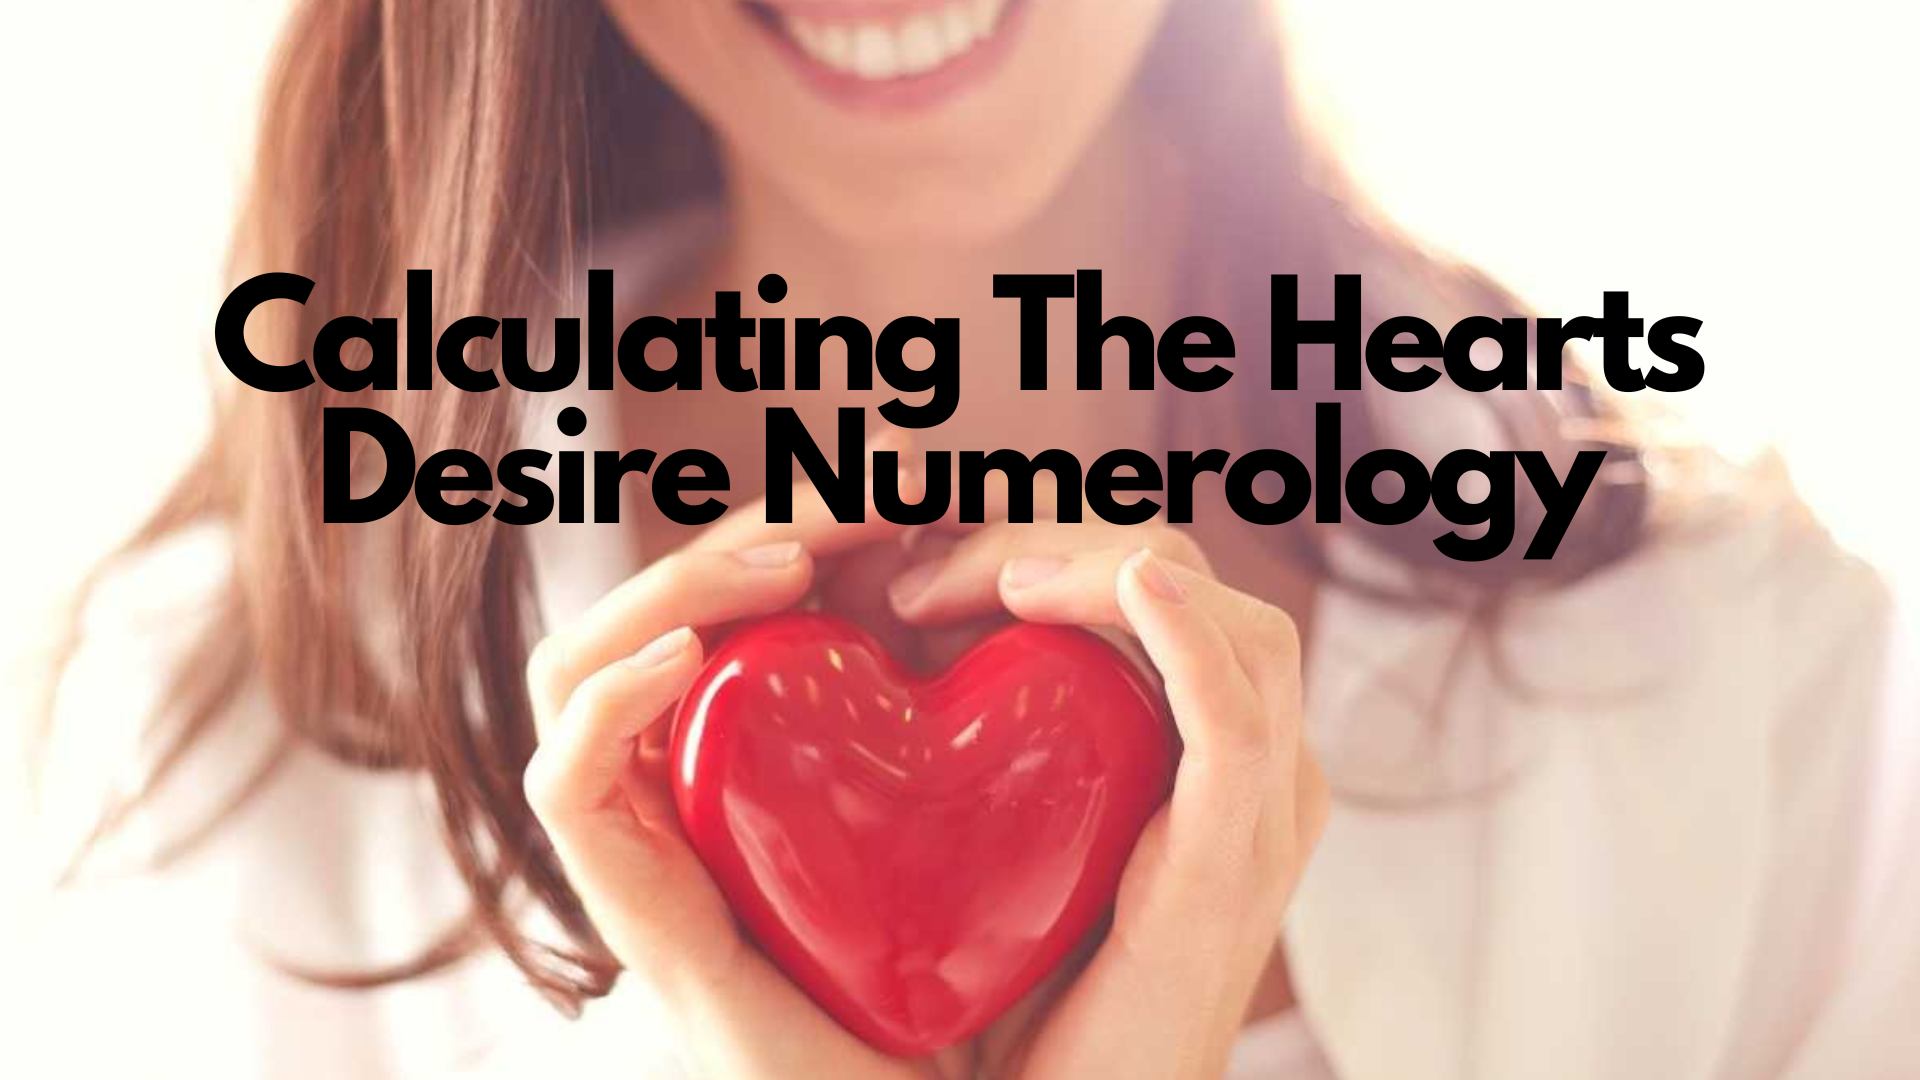 A person holding a heart shaped thing while smiling with words Calculating The Hearts Desire Numerology